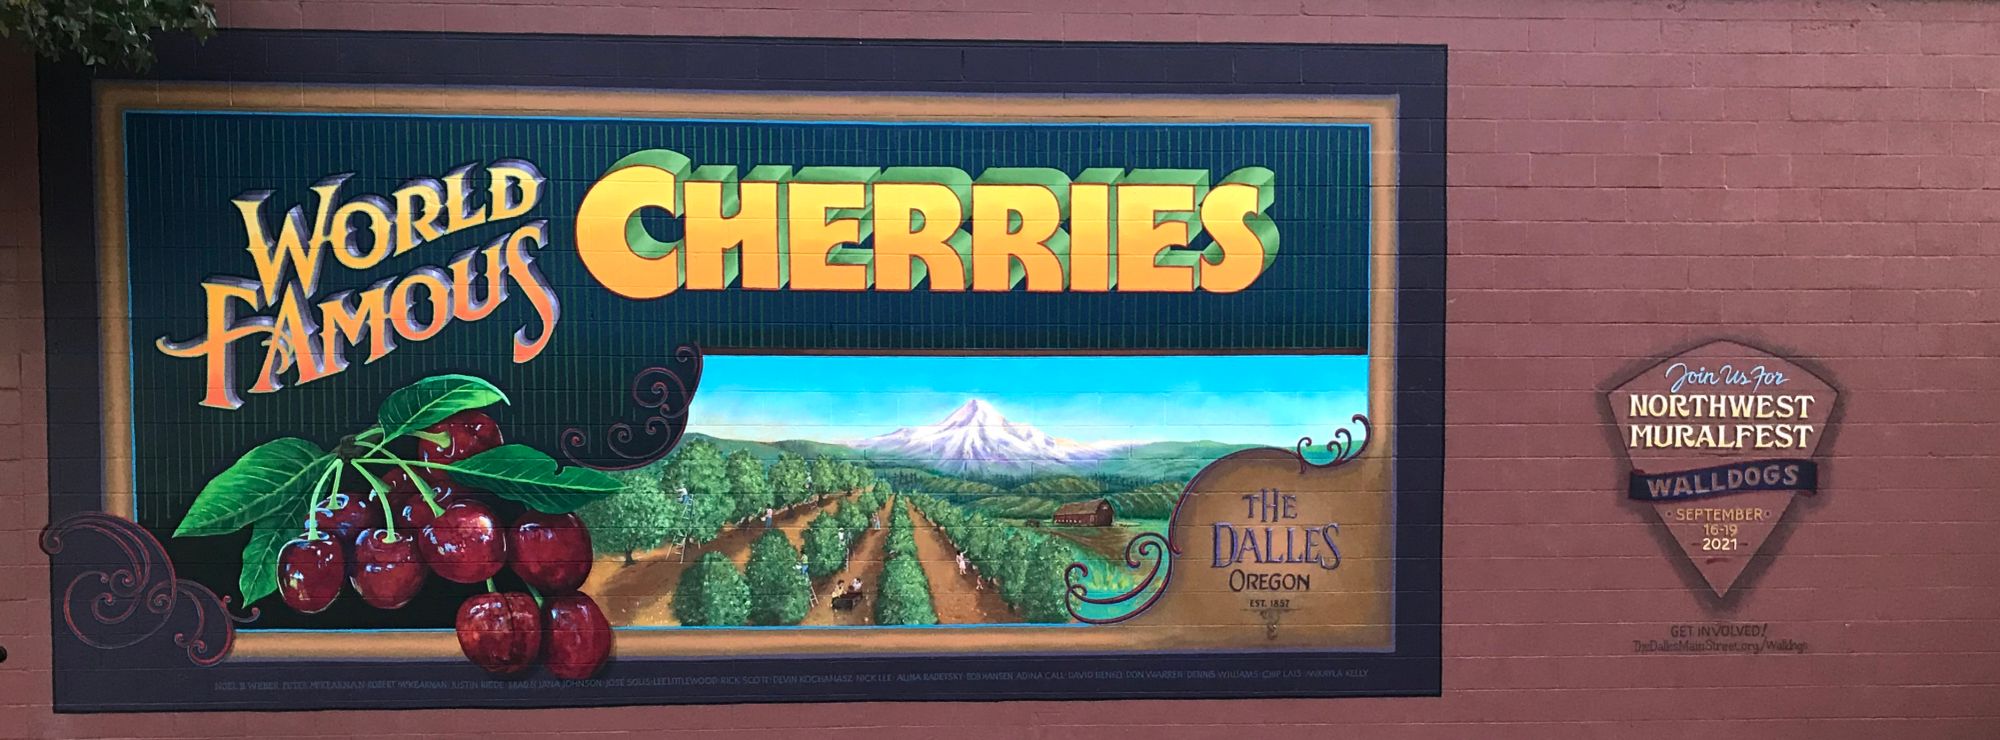 'World Famous Cherries' and a picture of people working in a cherry orchard.